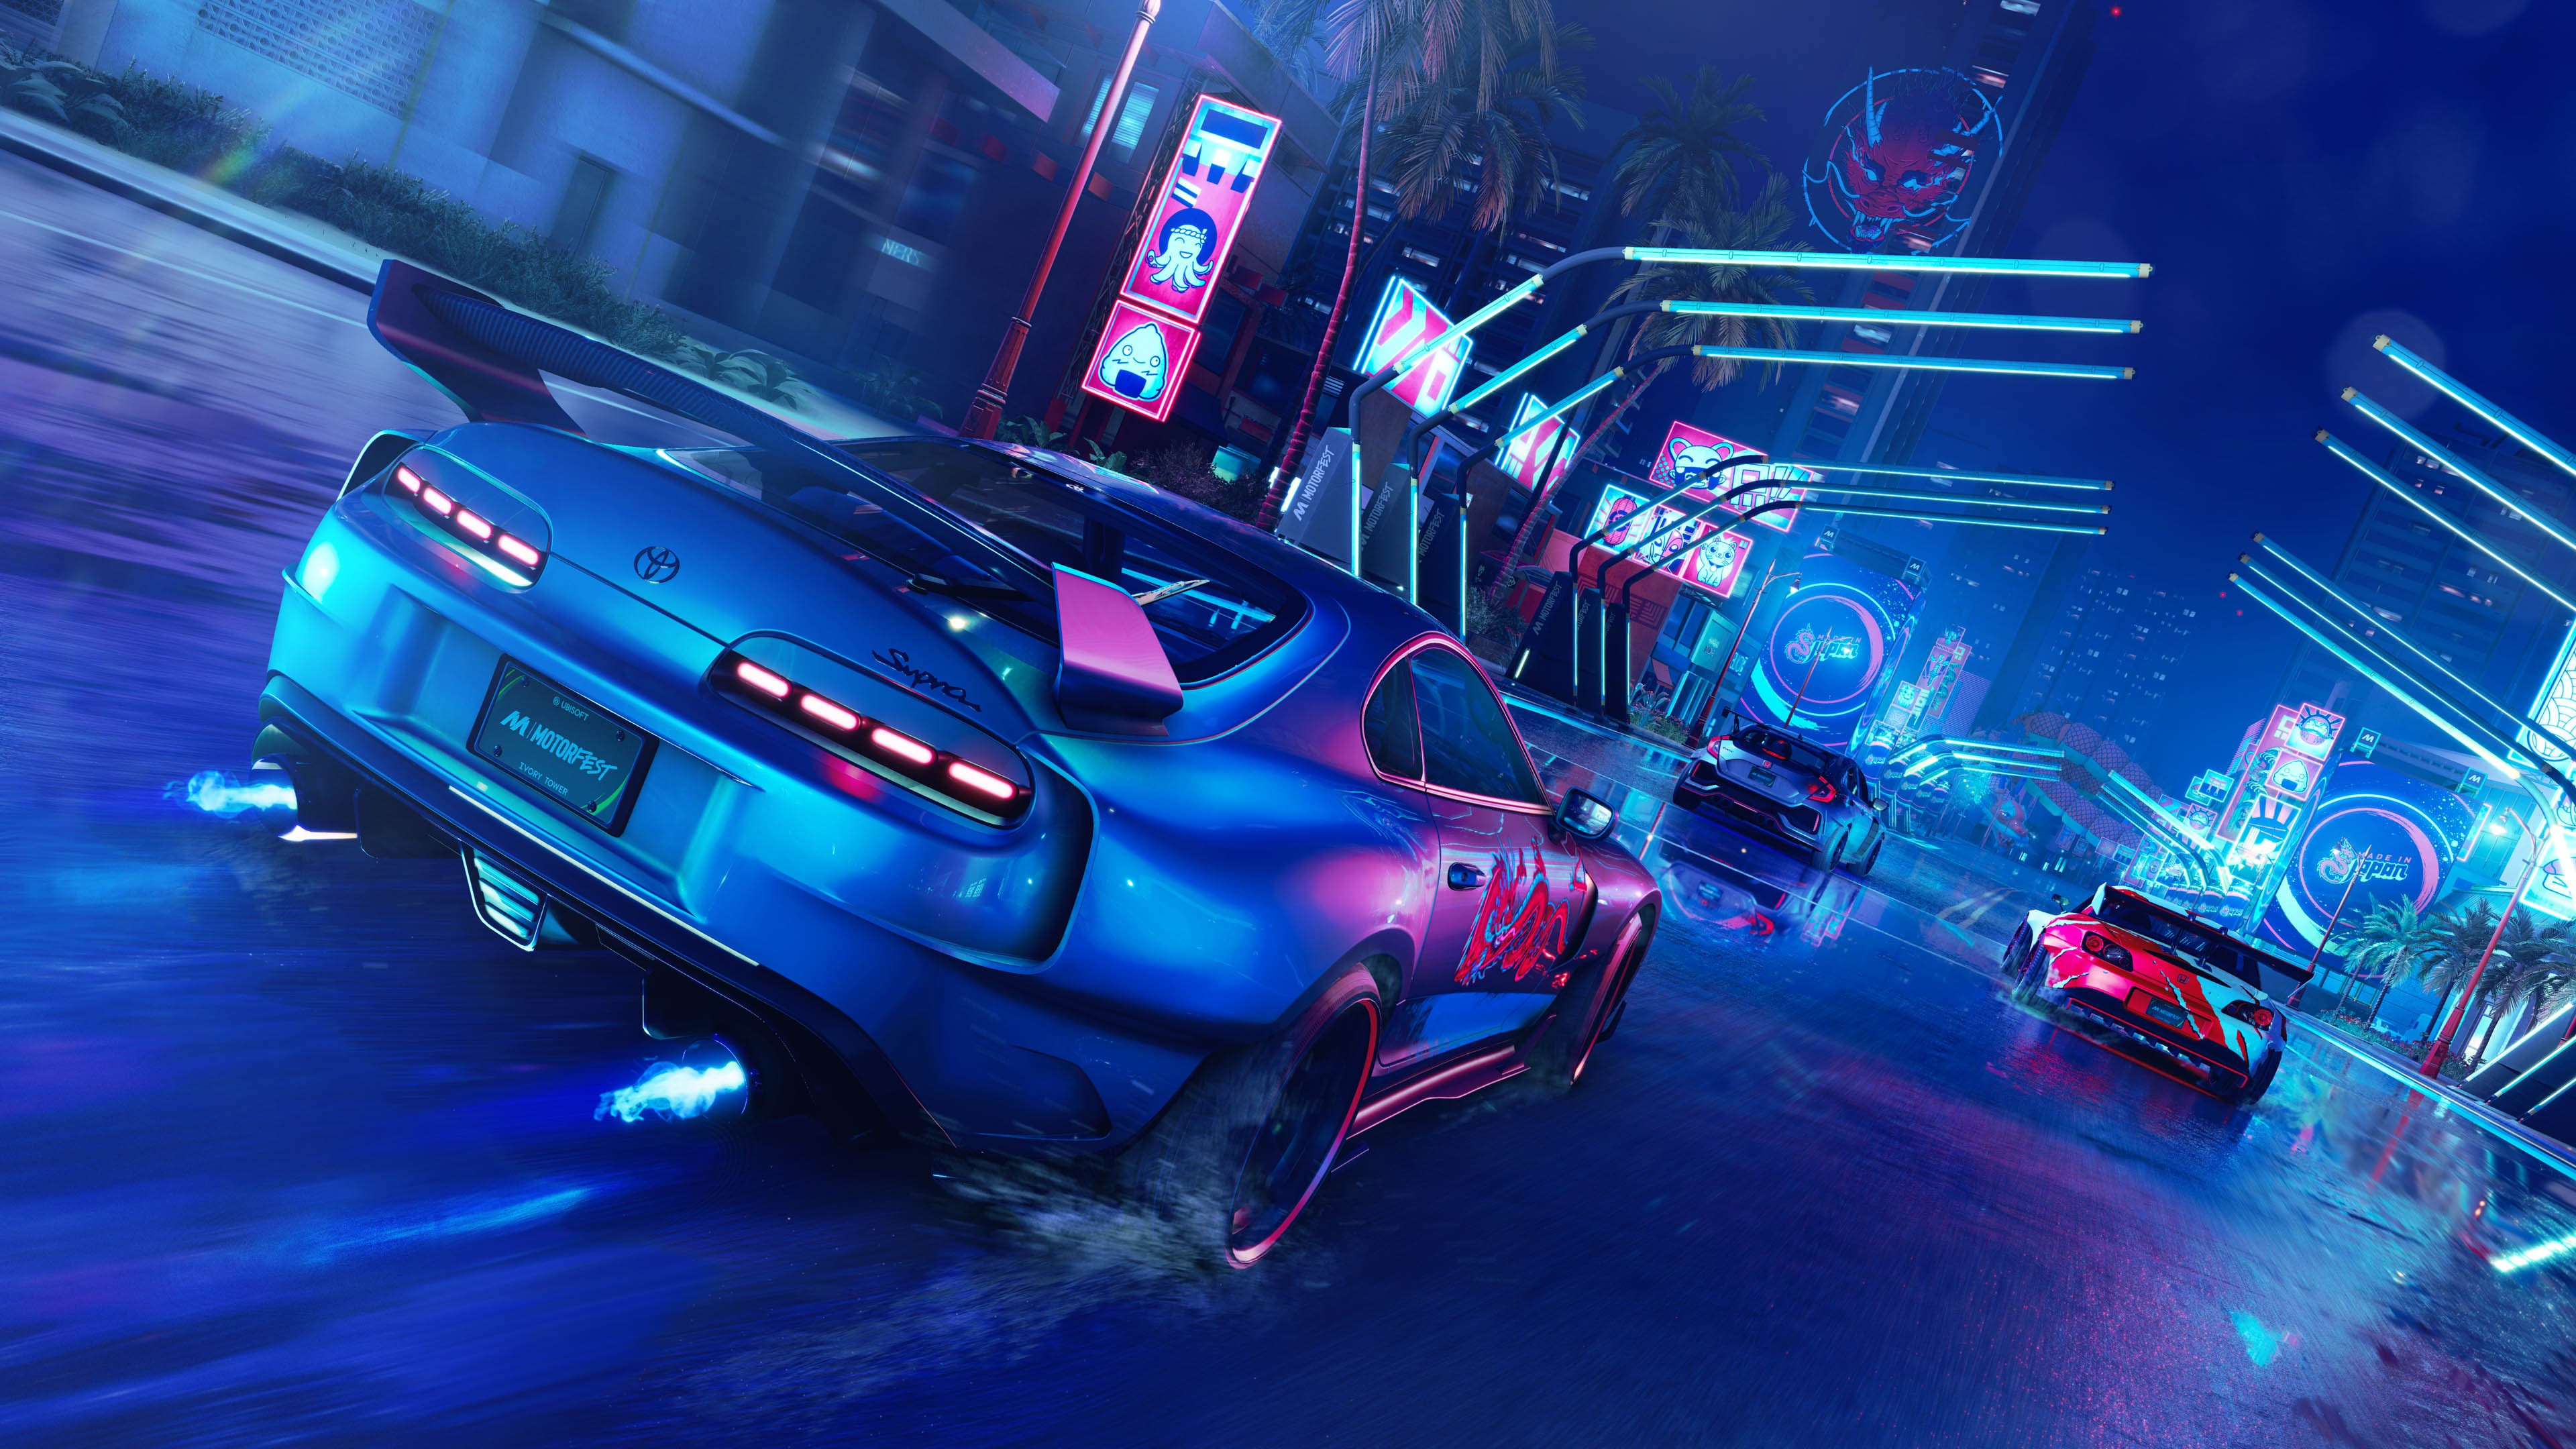 The Crew Motorfest (PC) Key cheap - Price of $41.25 for Uplay